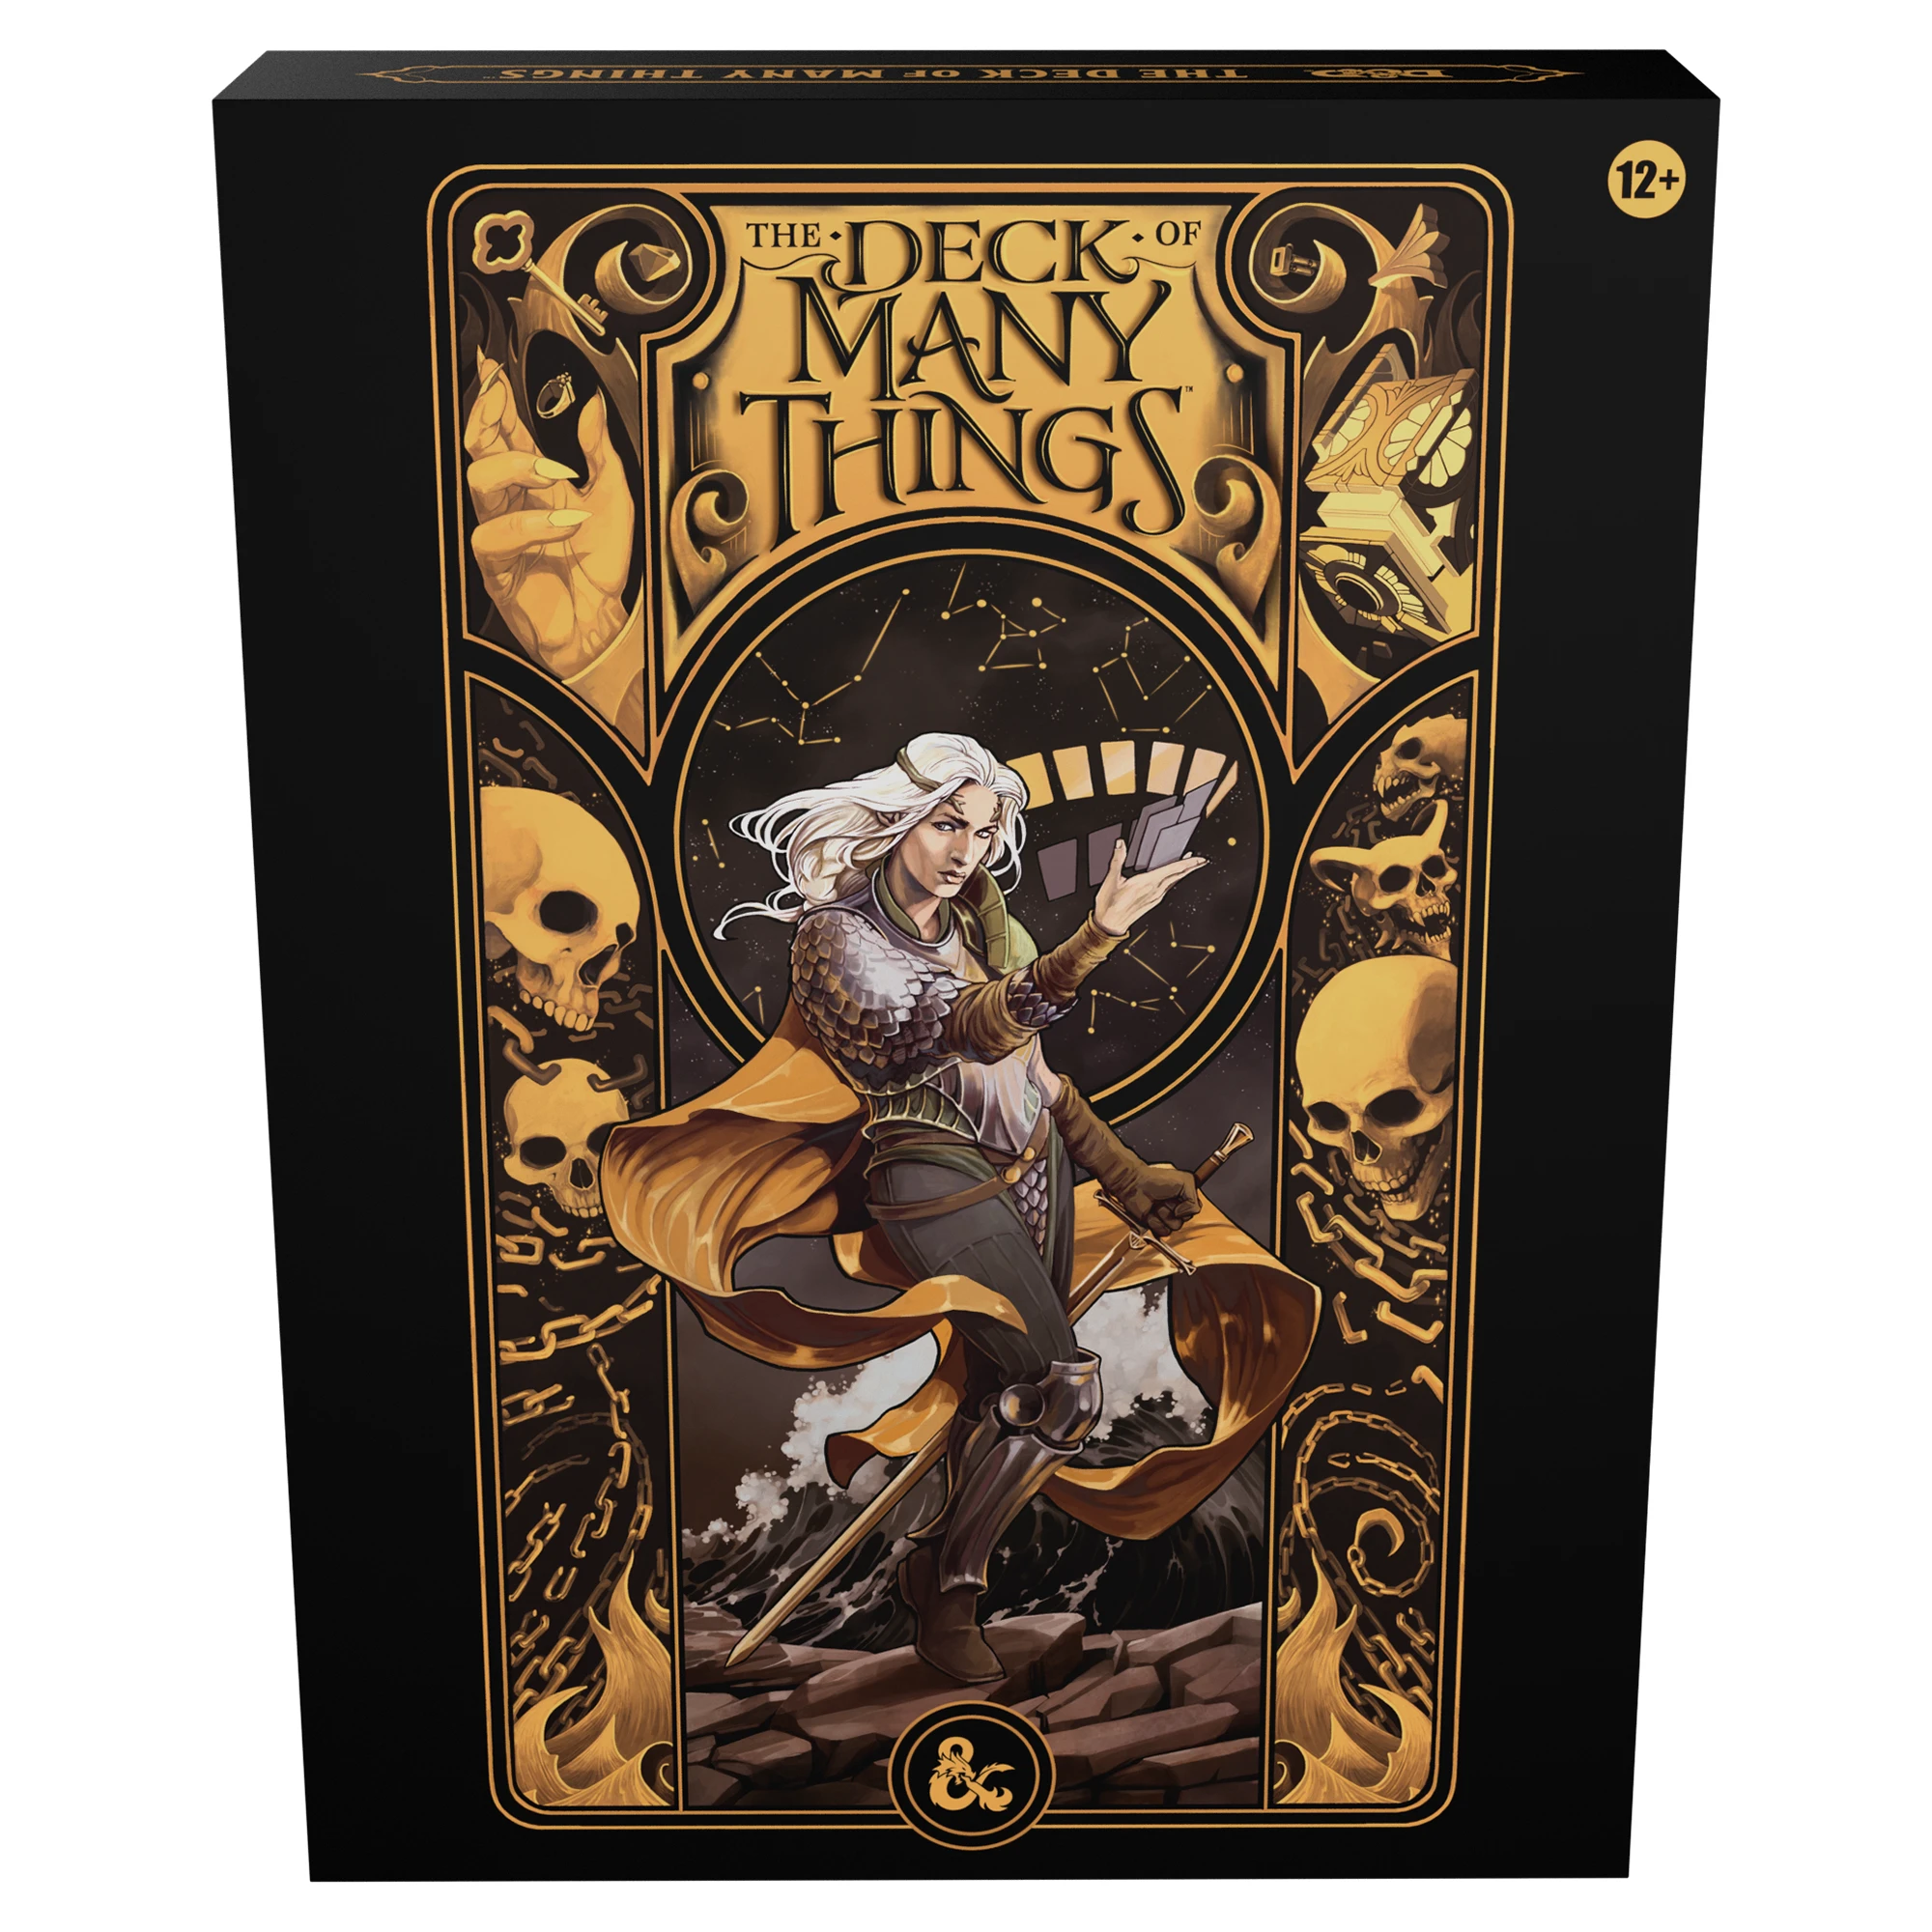 DnD Deck of Many Things review – both dazzling and dull